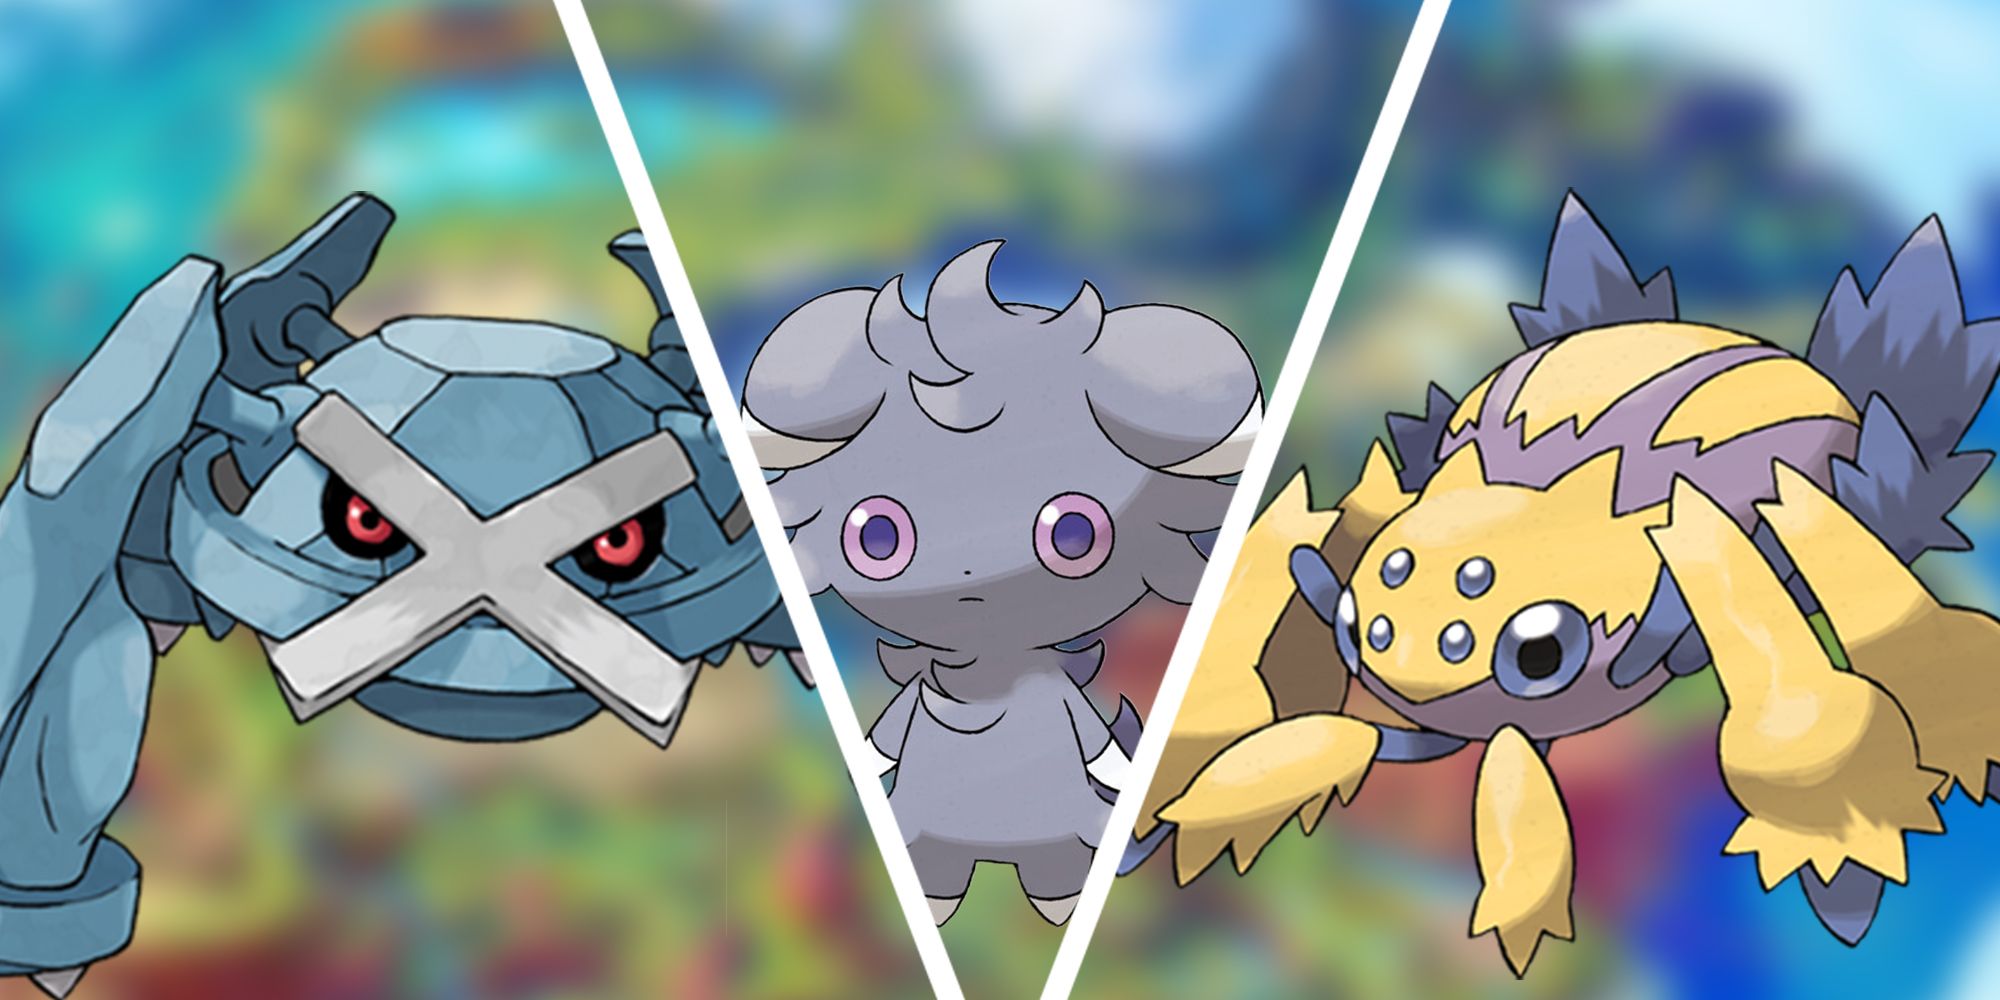 From left to right, Metagross, Espurr, and Galvantula shown posing over a background